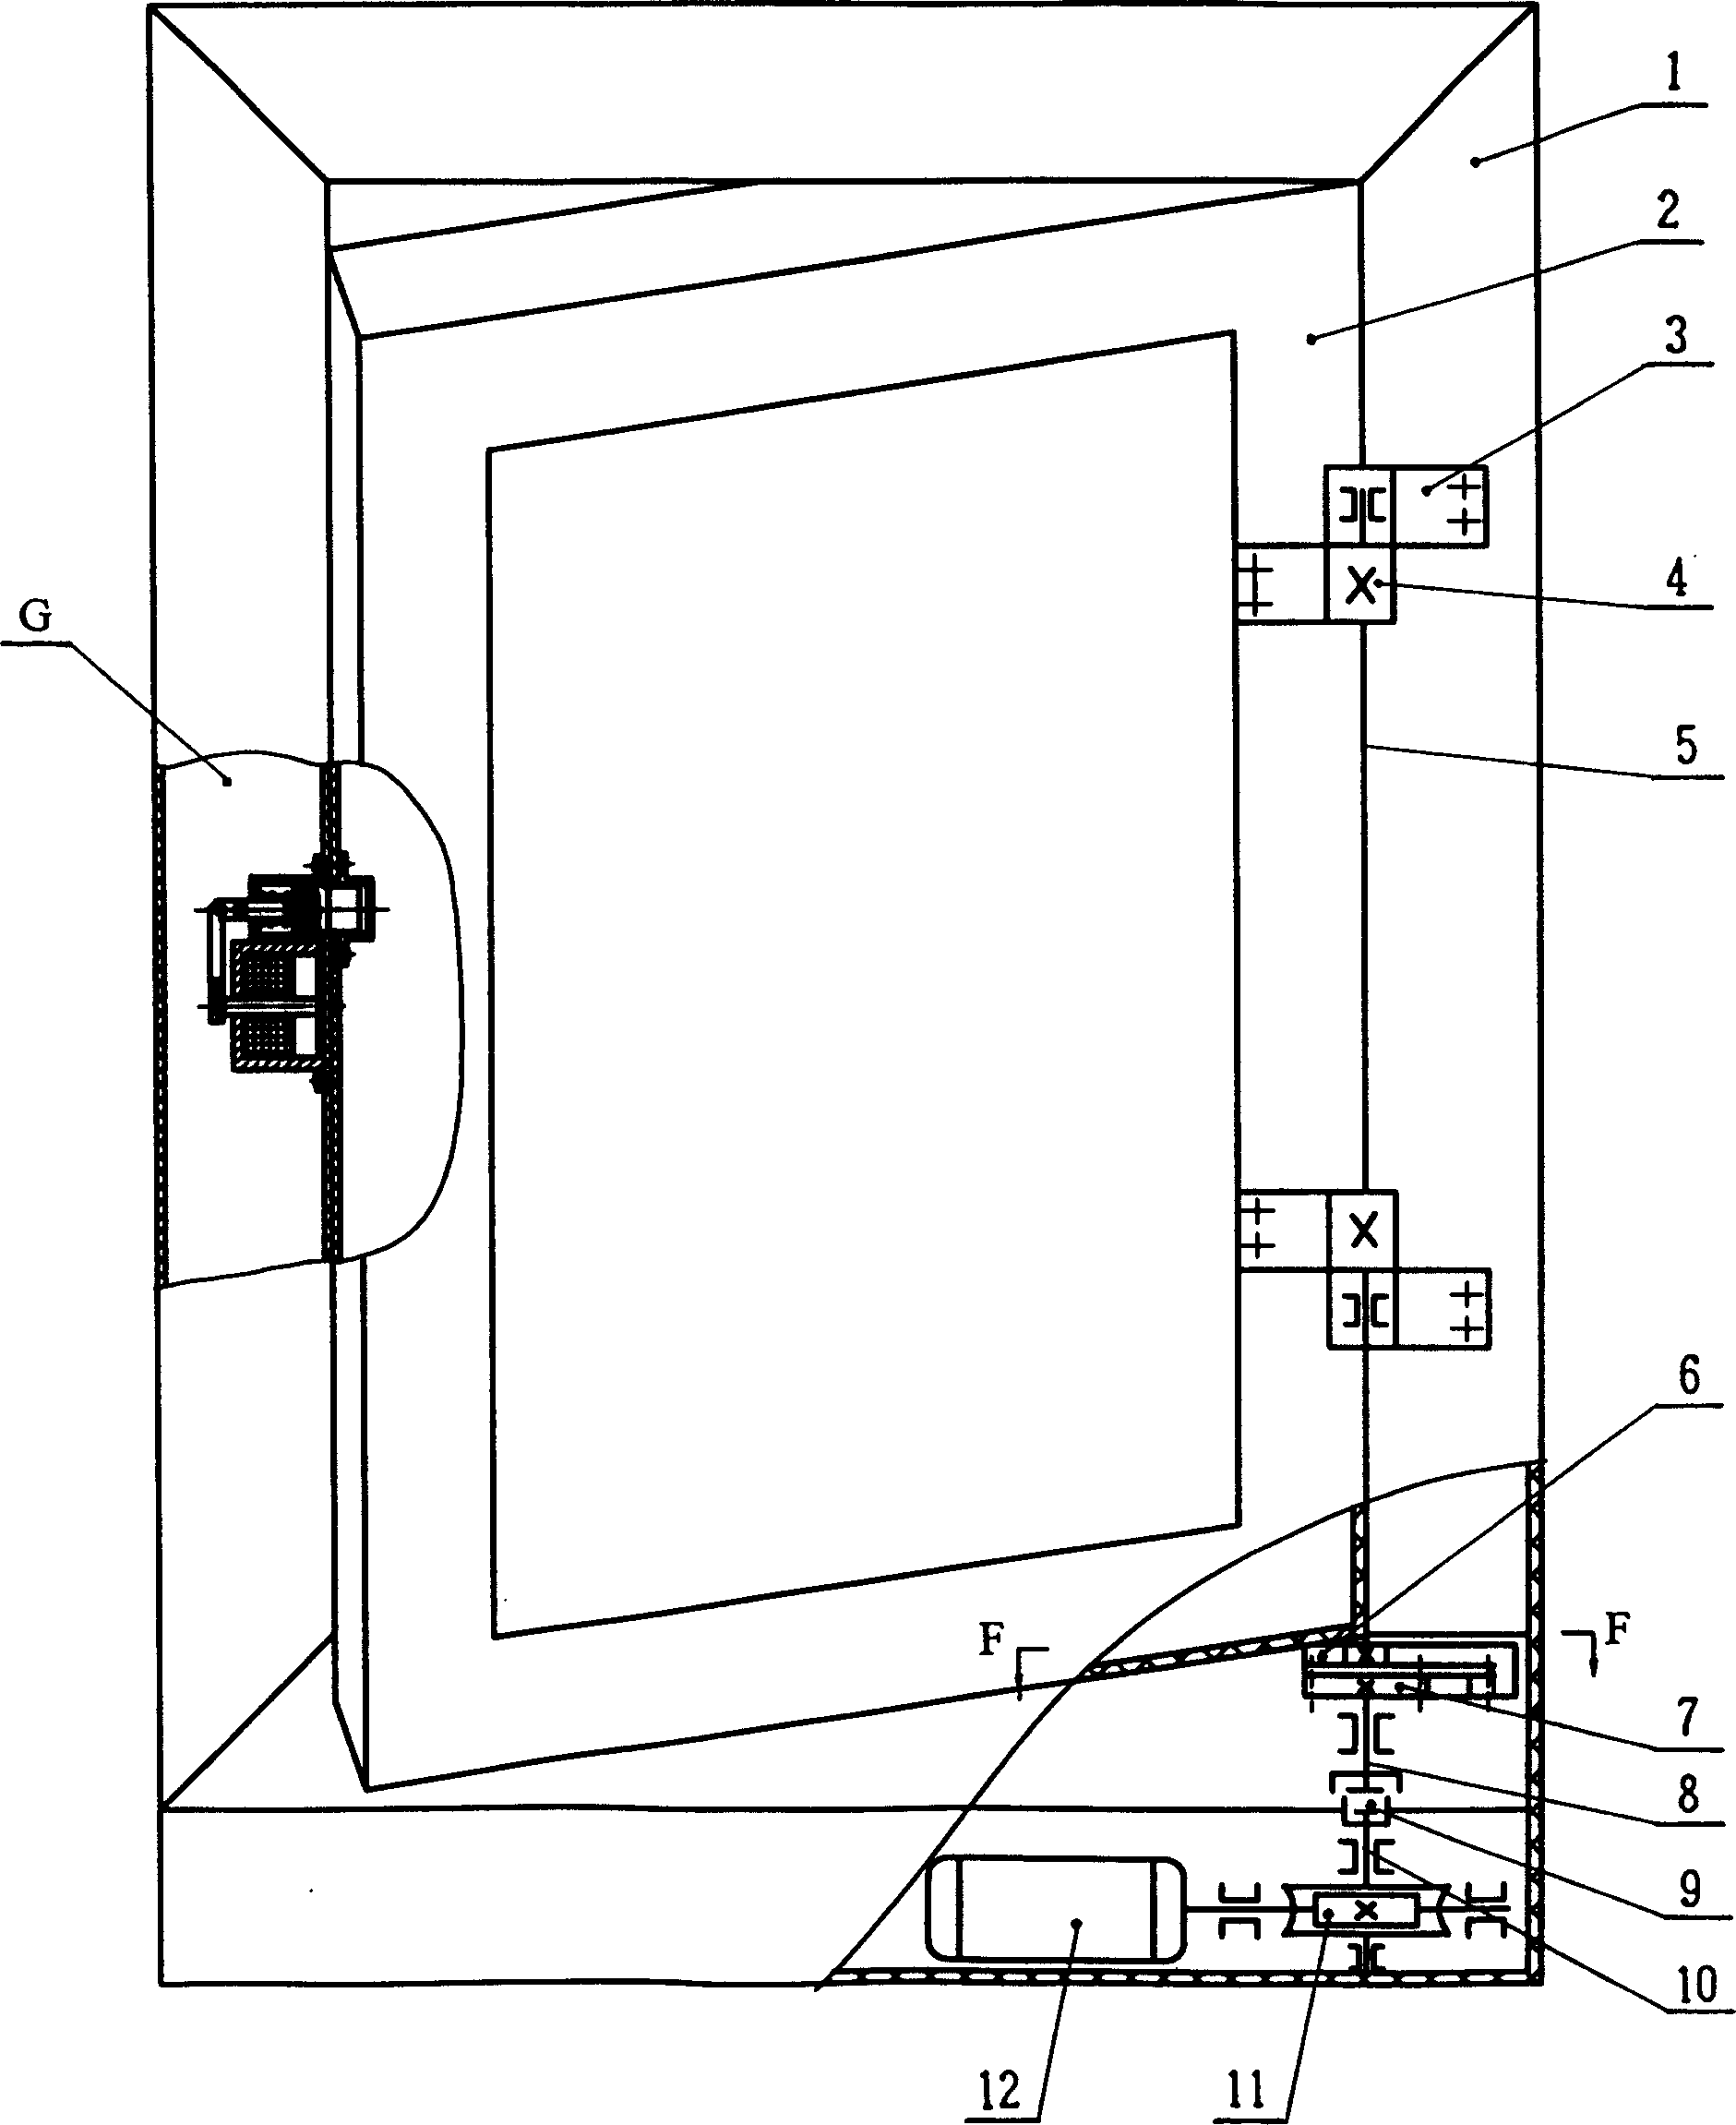 Roatating shaft type electric device for opening windows